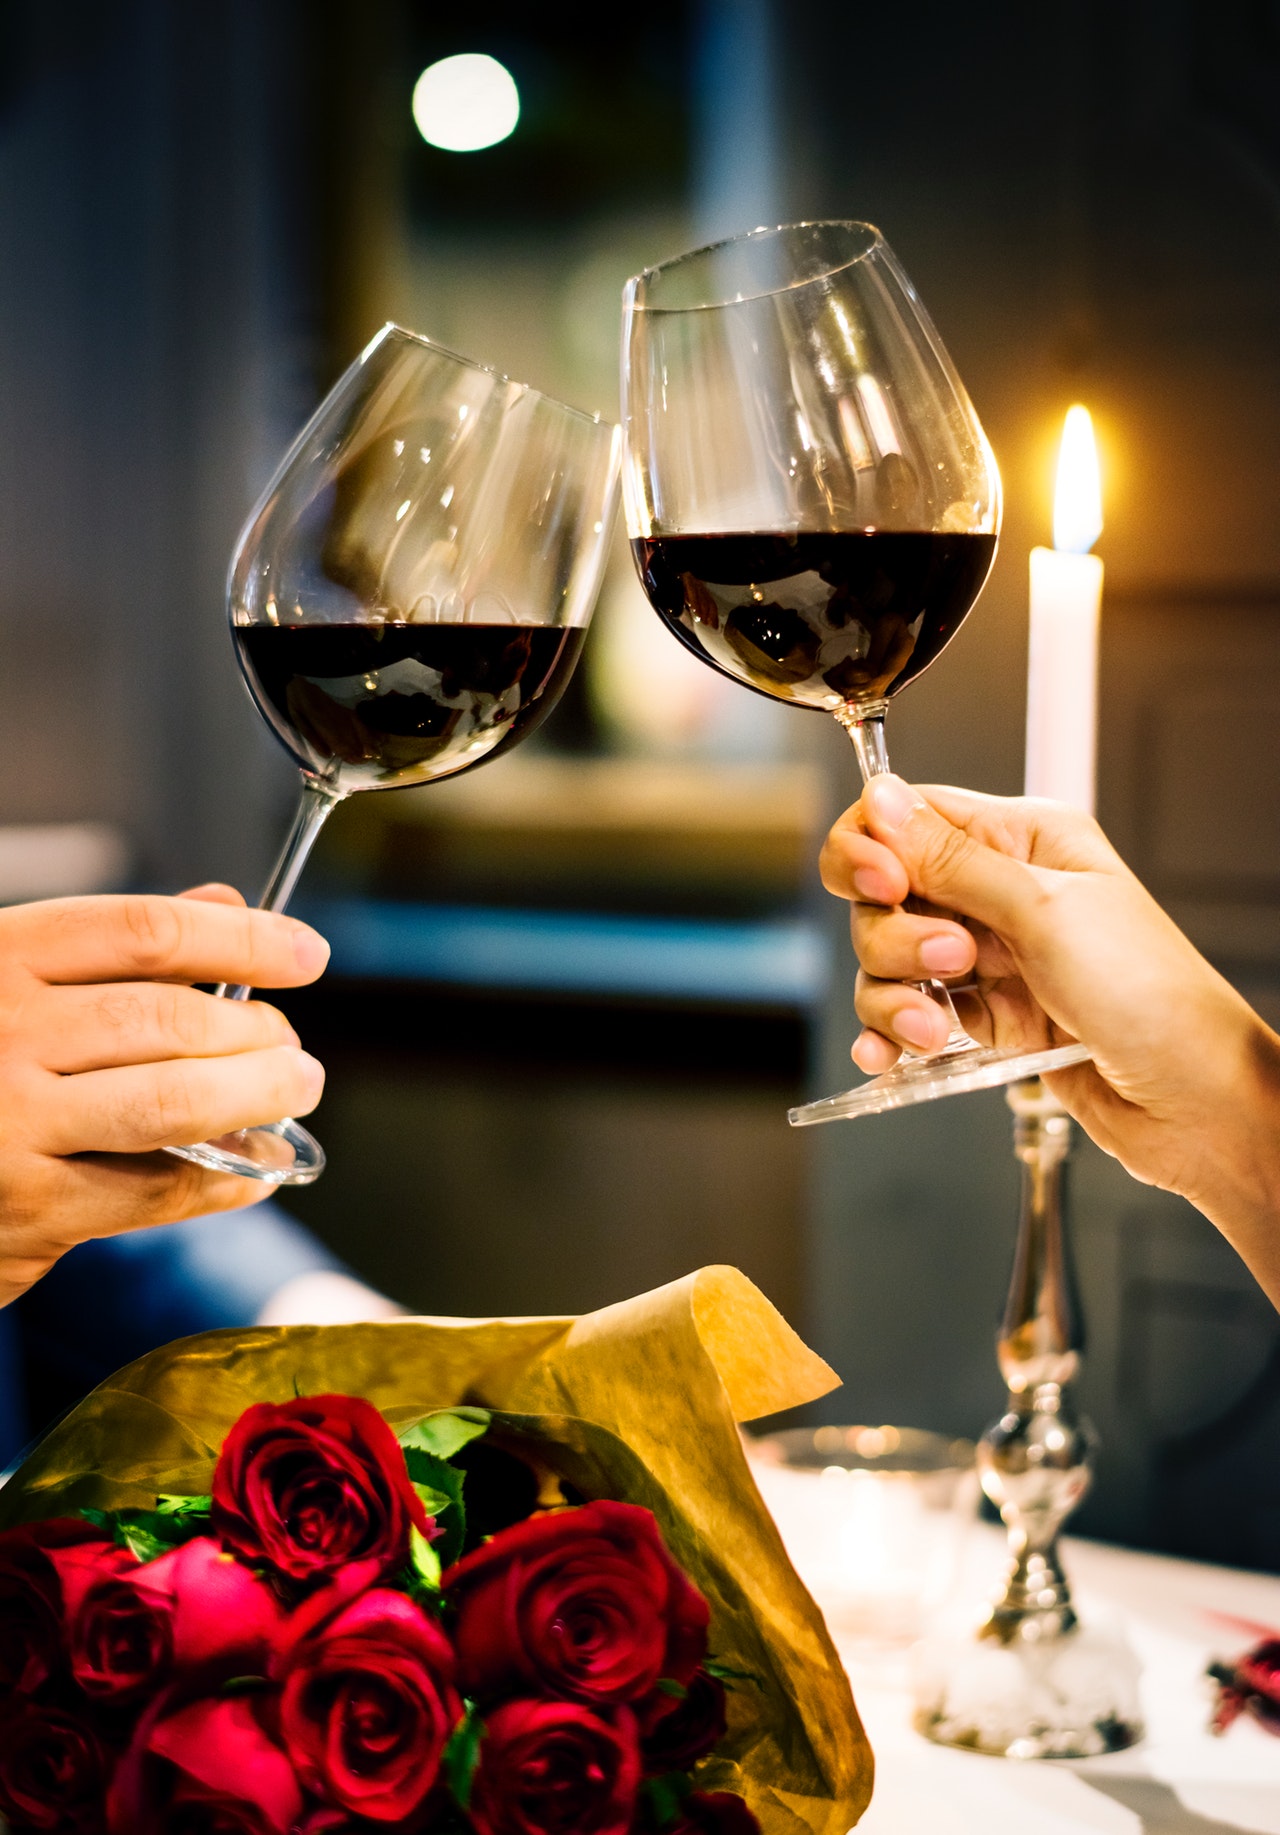 Wine glasses with candlelight and roses